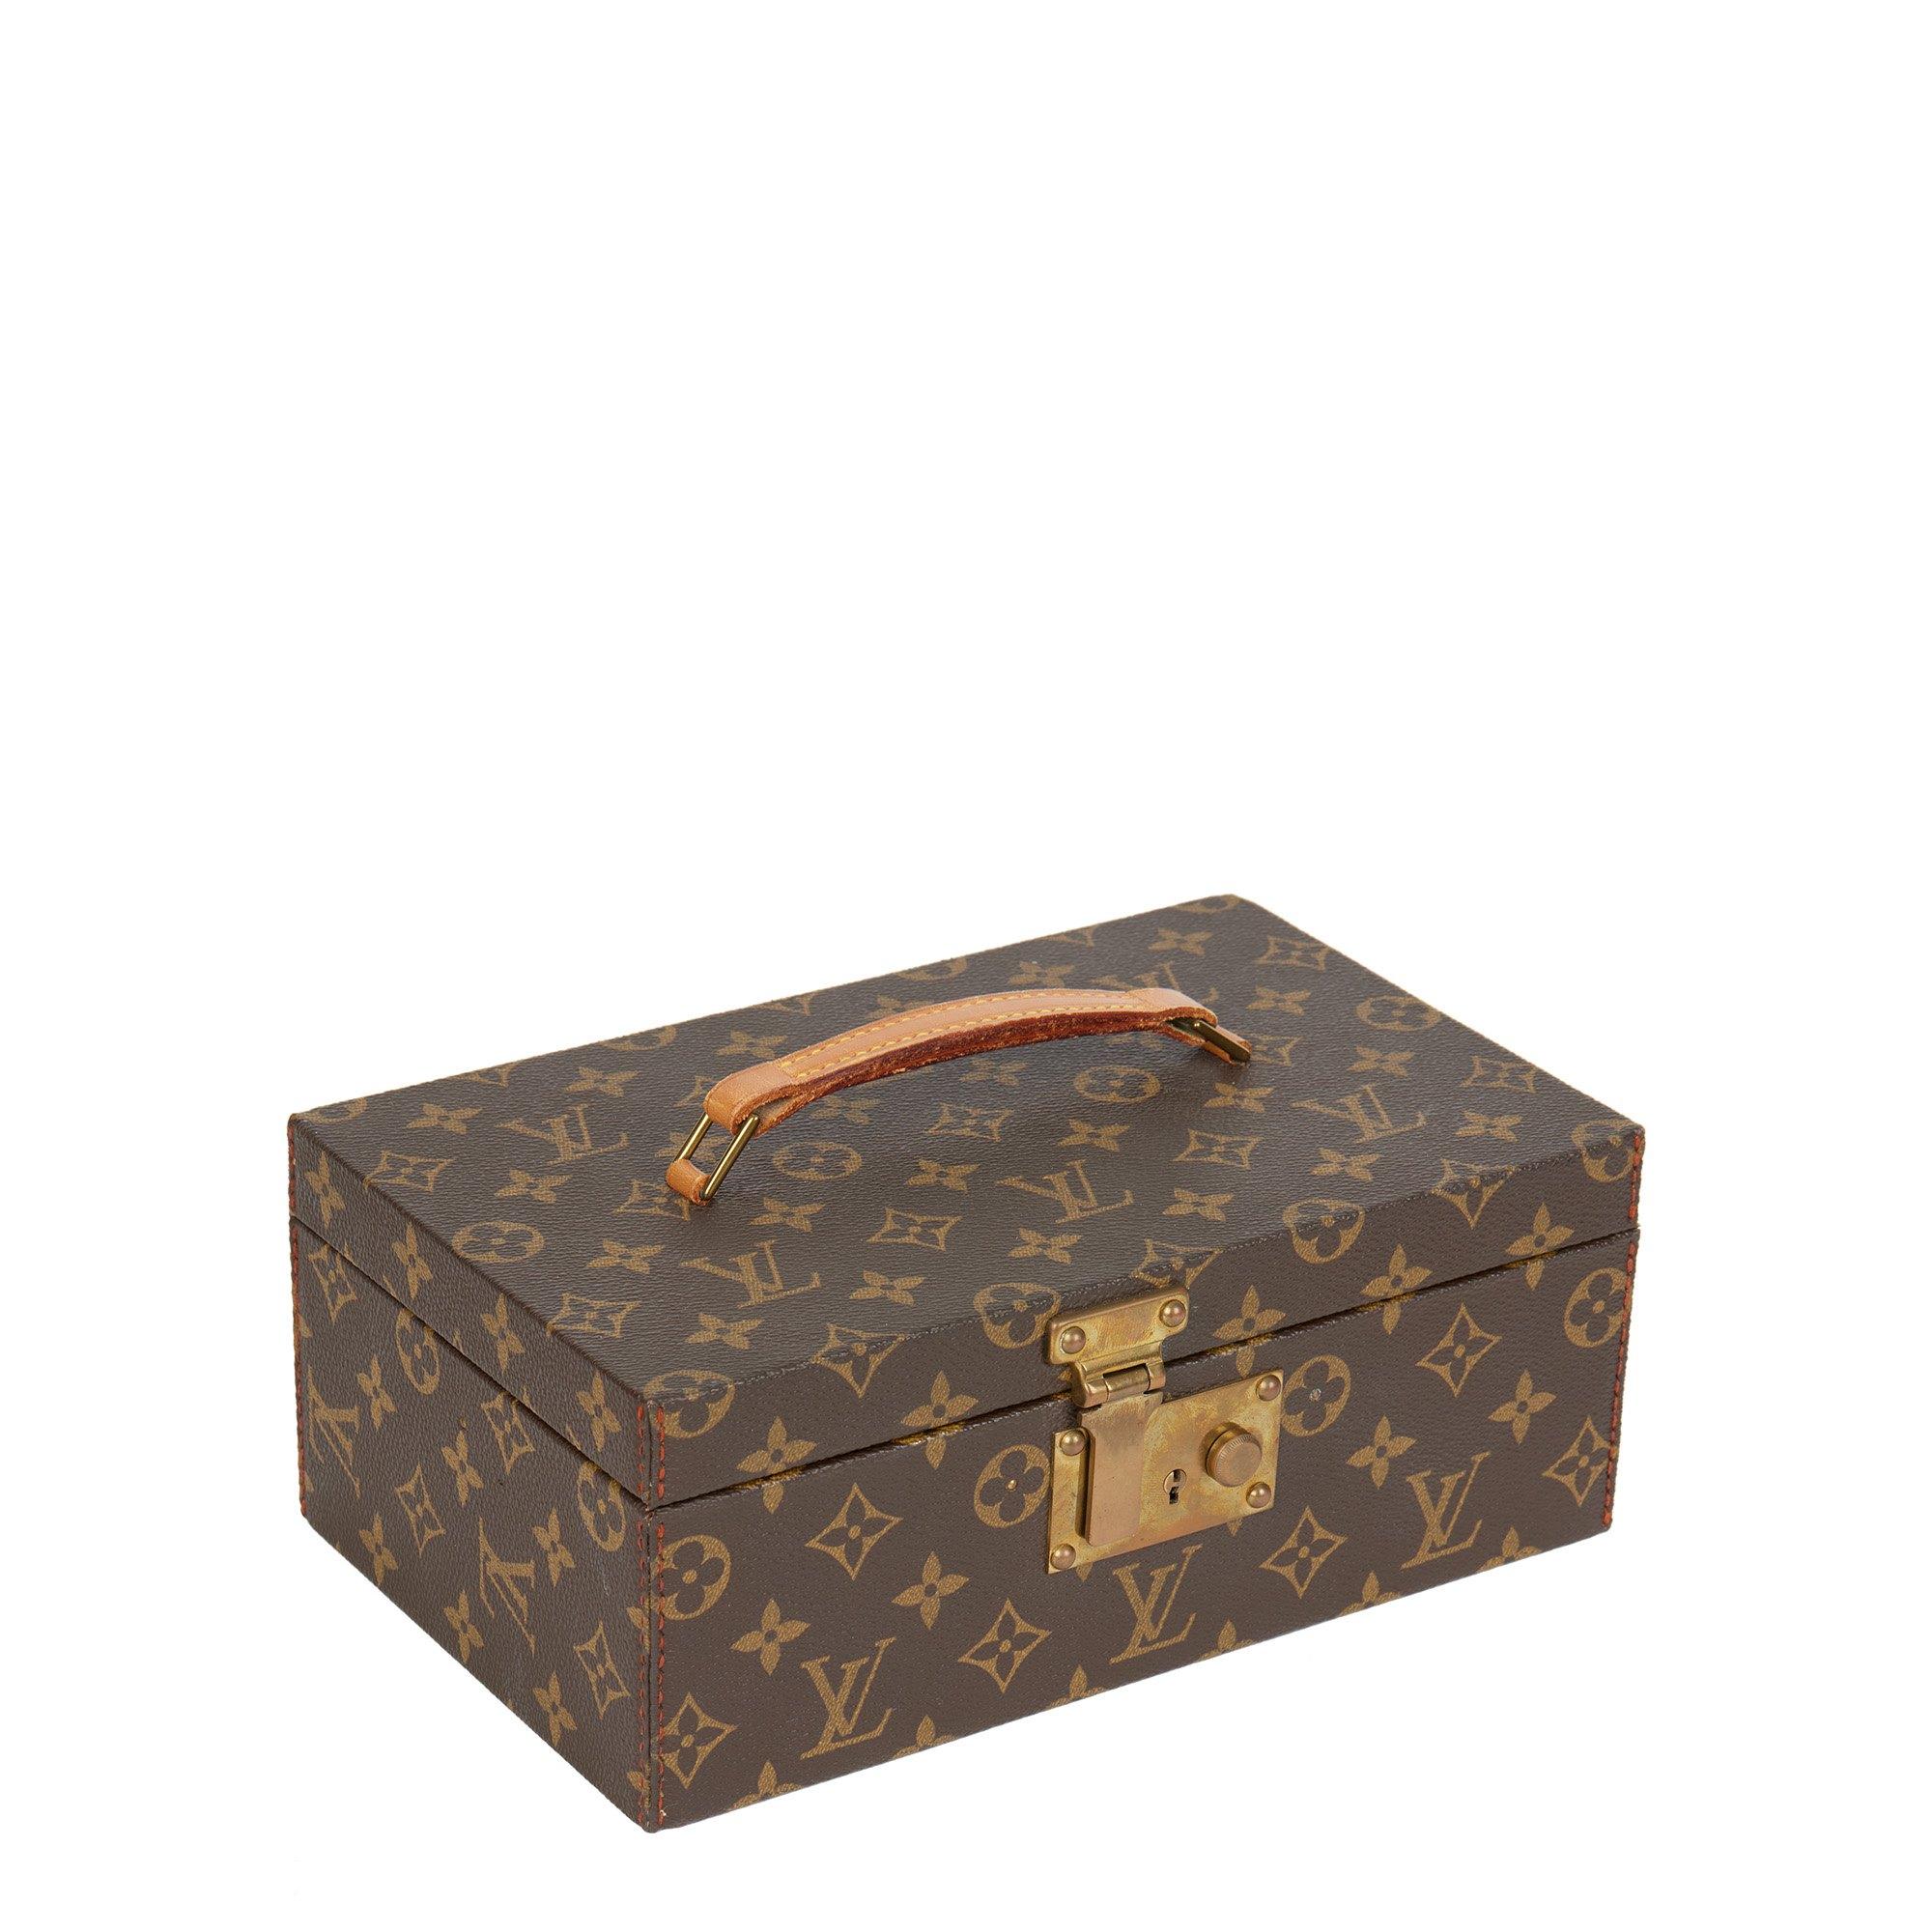 Louis Vuitton BROWN MONOGRAM COATED CANVAS & VACHETTA LEATHER VINTAGE BOITE A TOUT

CONDITION NOTES
The exterior is in very good condition with minimal signs of use.
The interior is in very good condition with minimal signs of use.
The hardware is